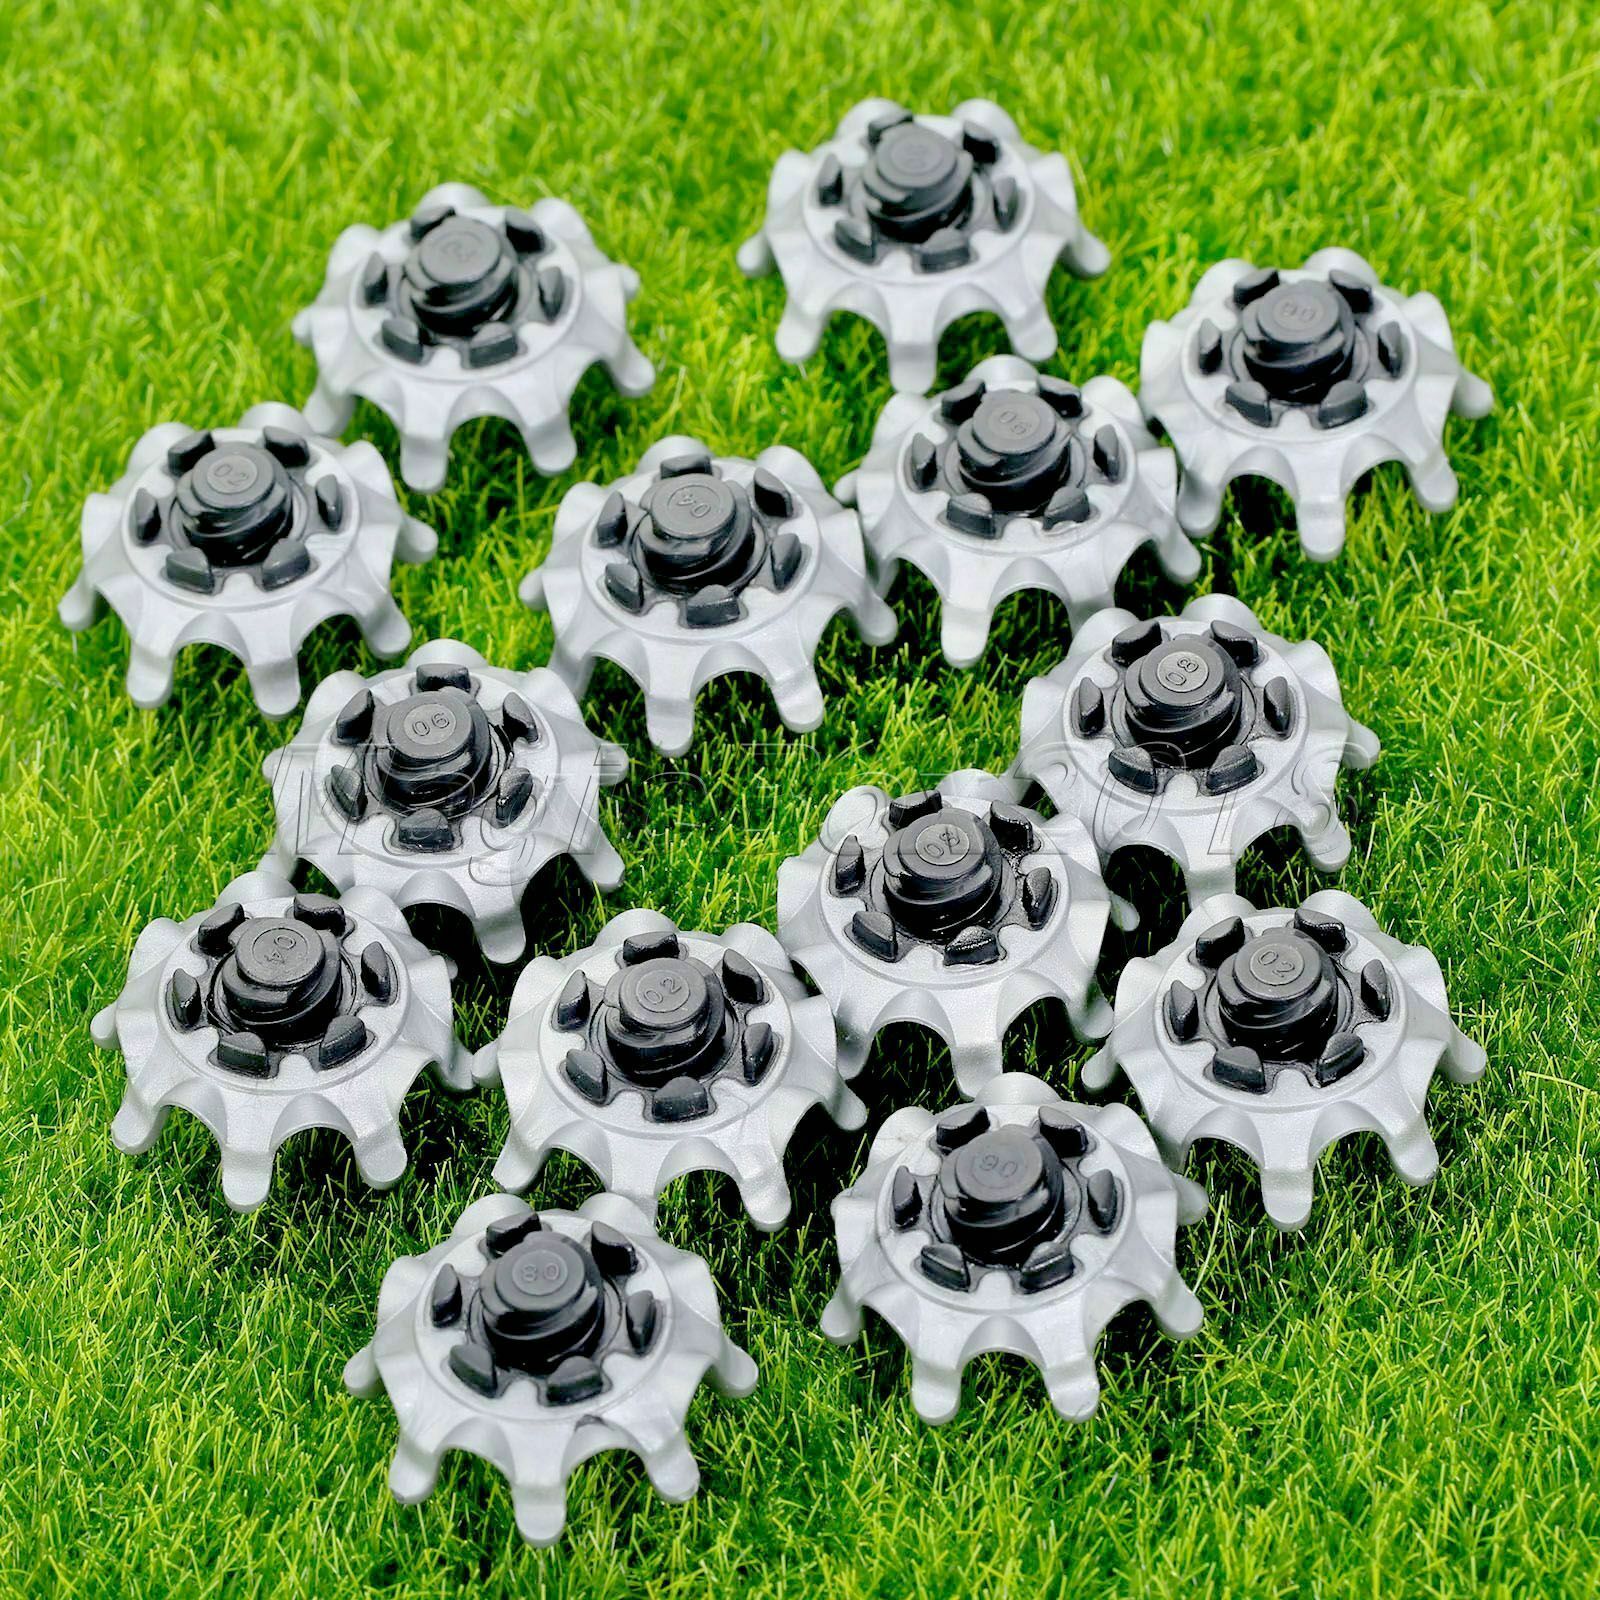 28x Soft Golf Shoe Spikes Replacement Champ Cleat Fast Twist Tri-lok For Footjoy